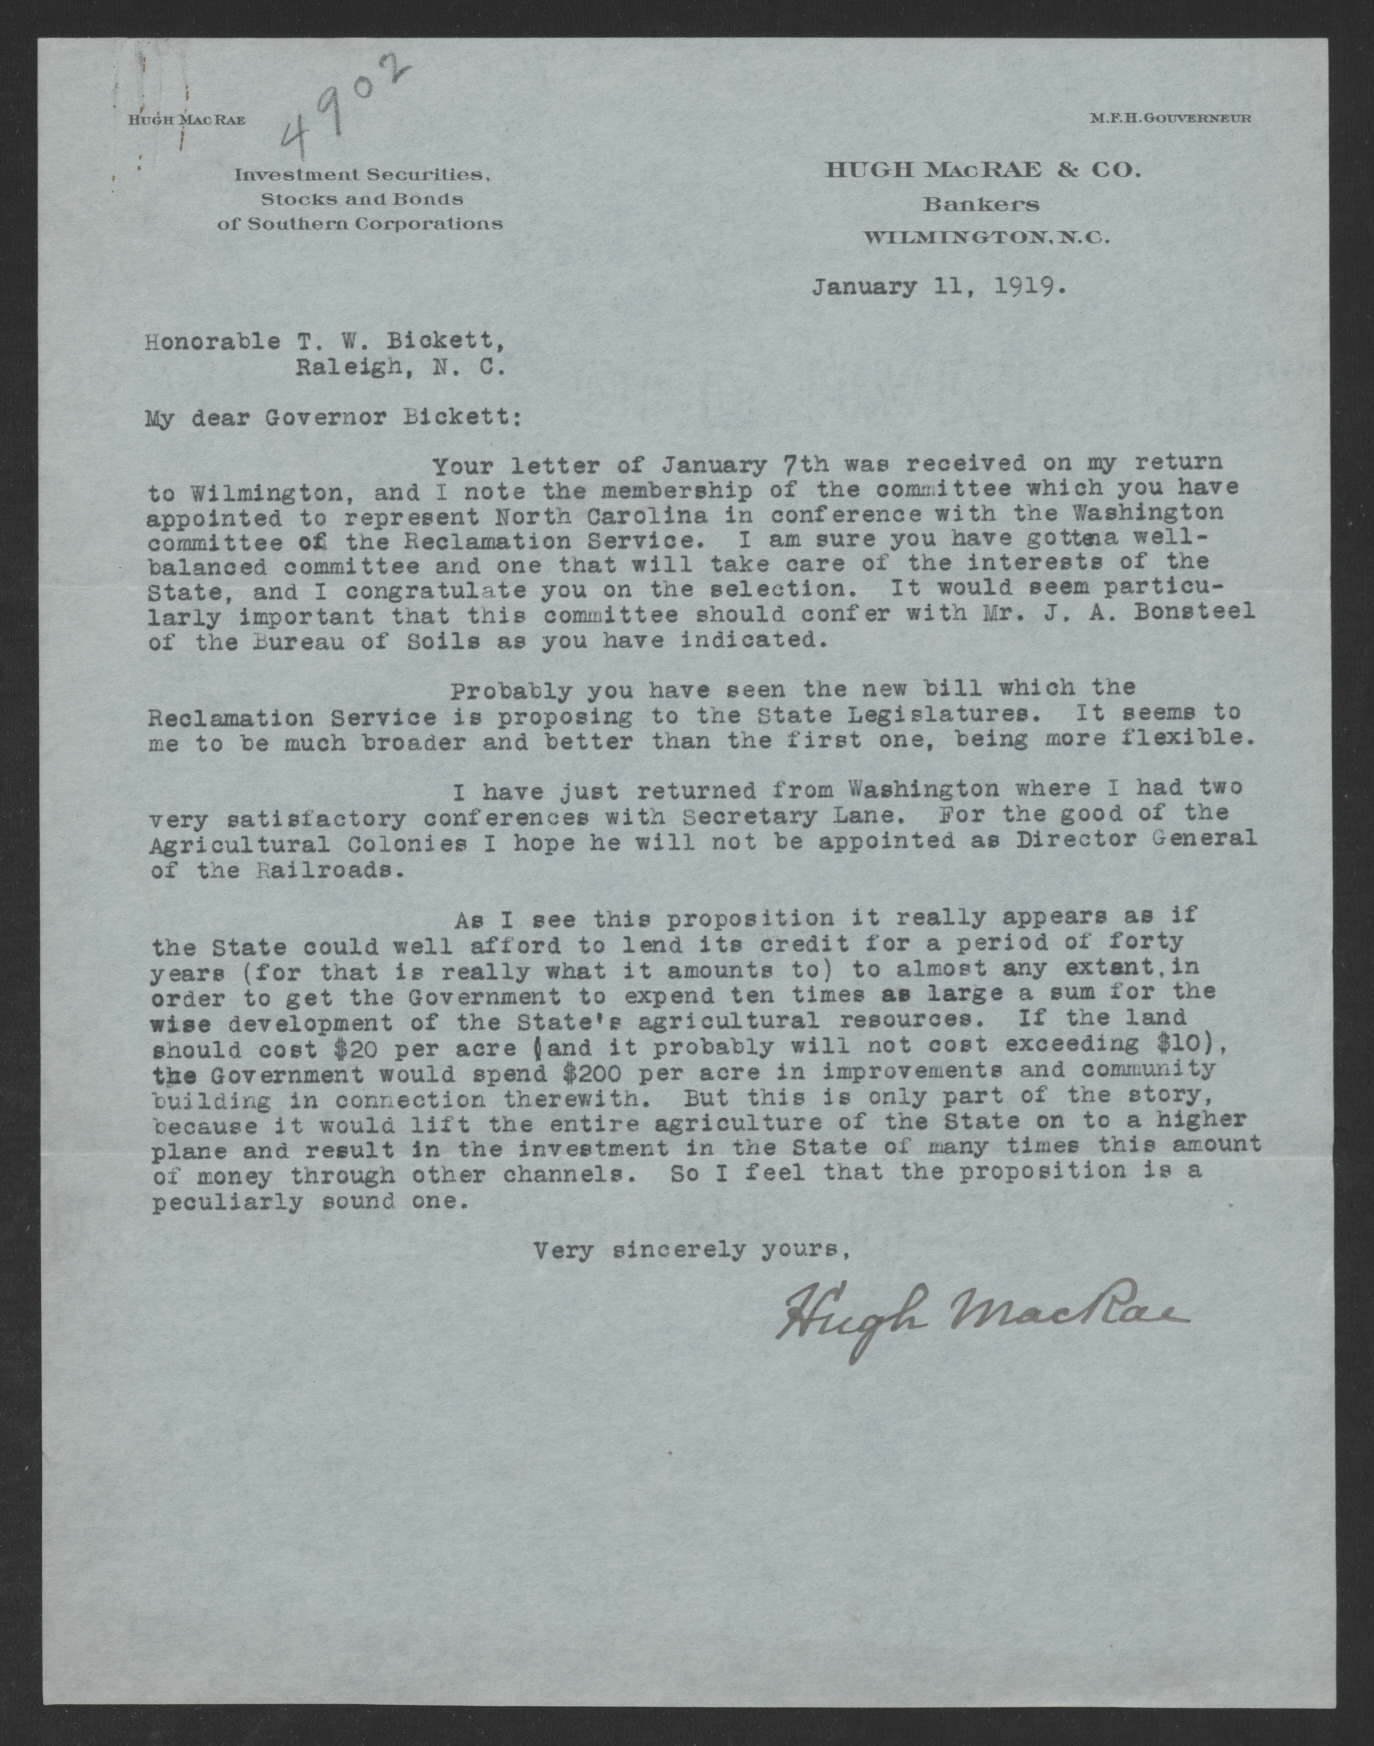 Letter from Hugh MacRae to Thomas W. Bickett, January 11, 1919